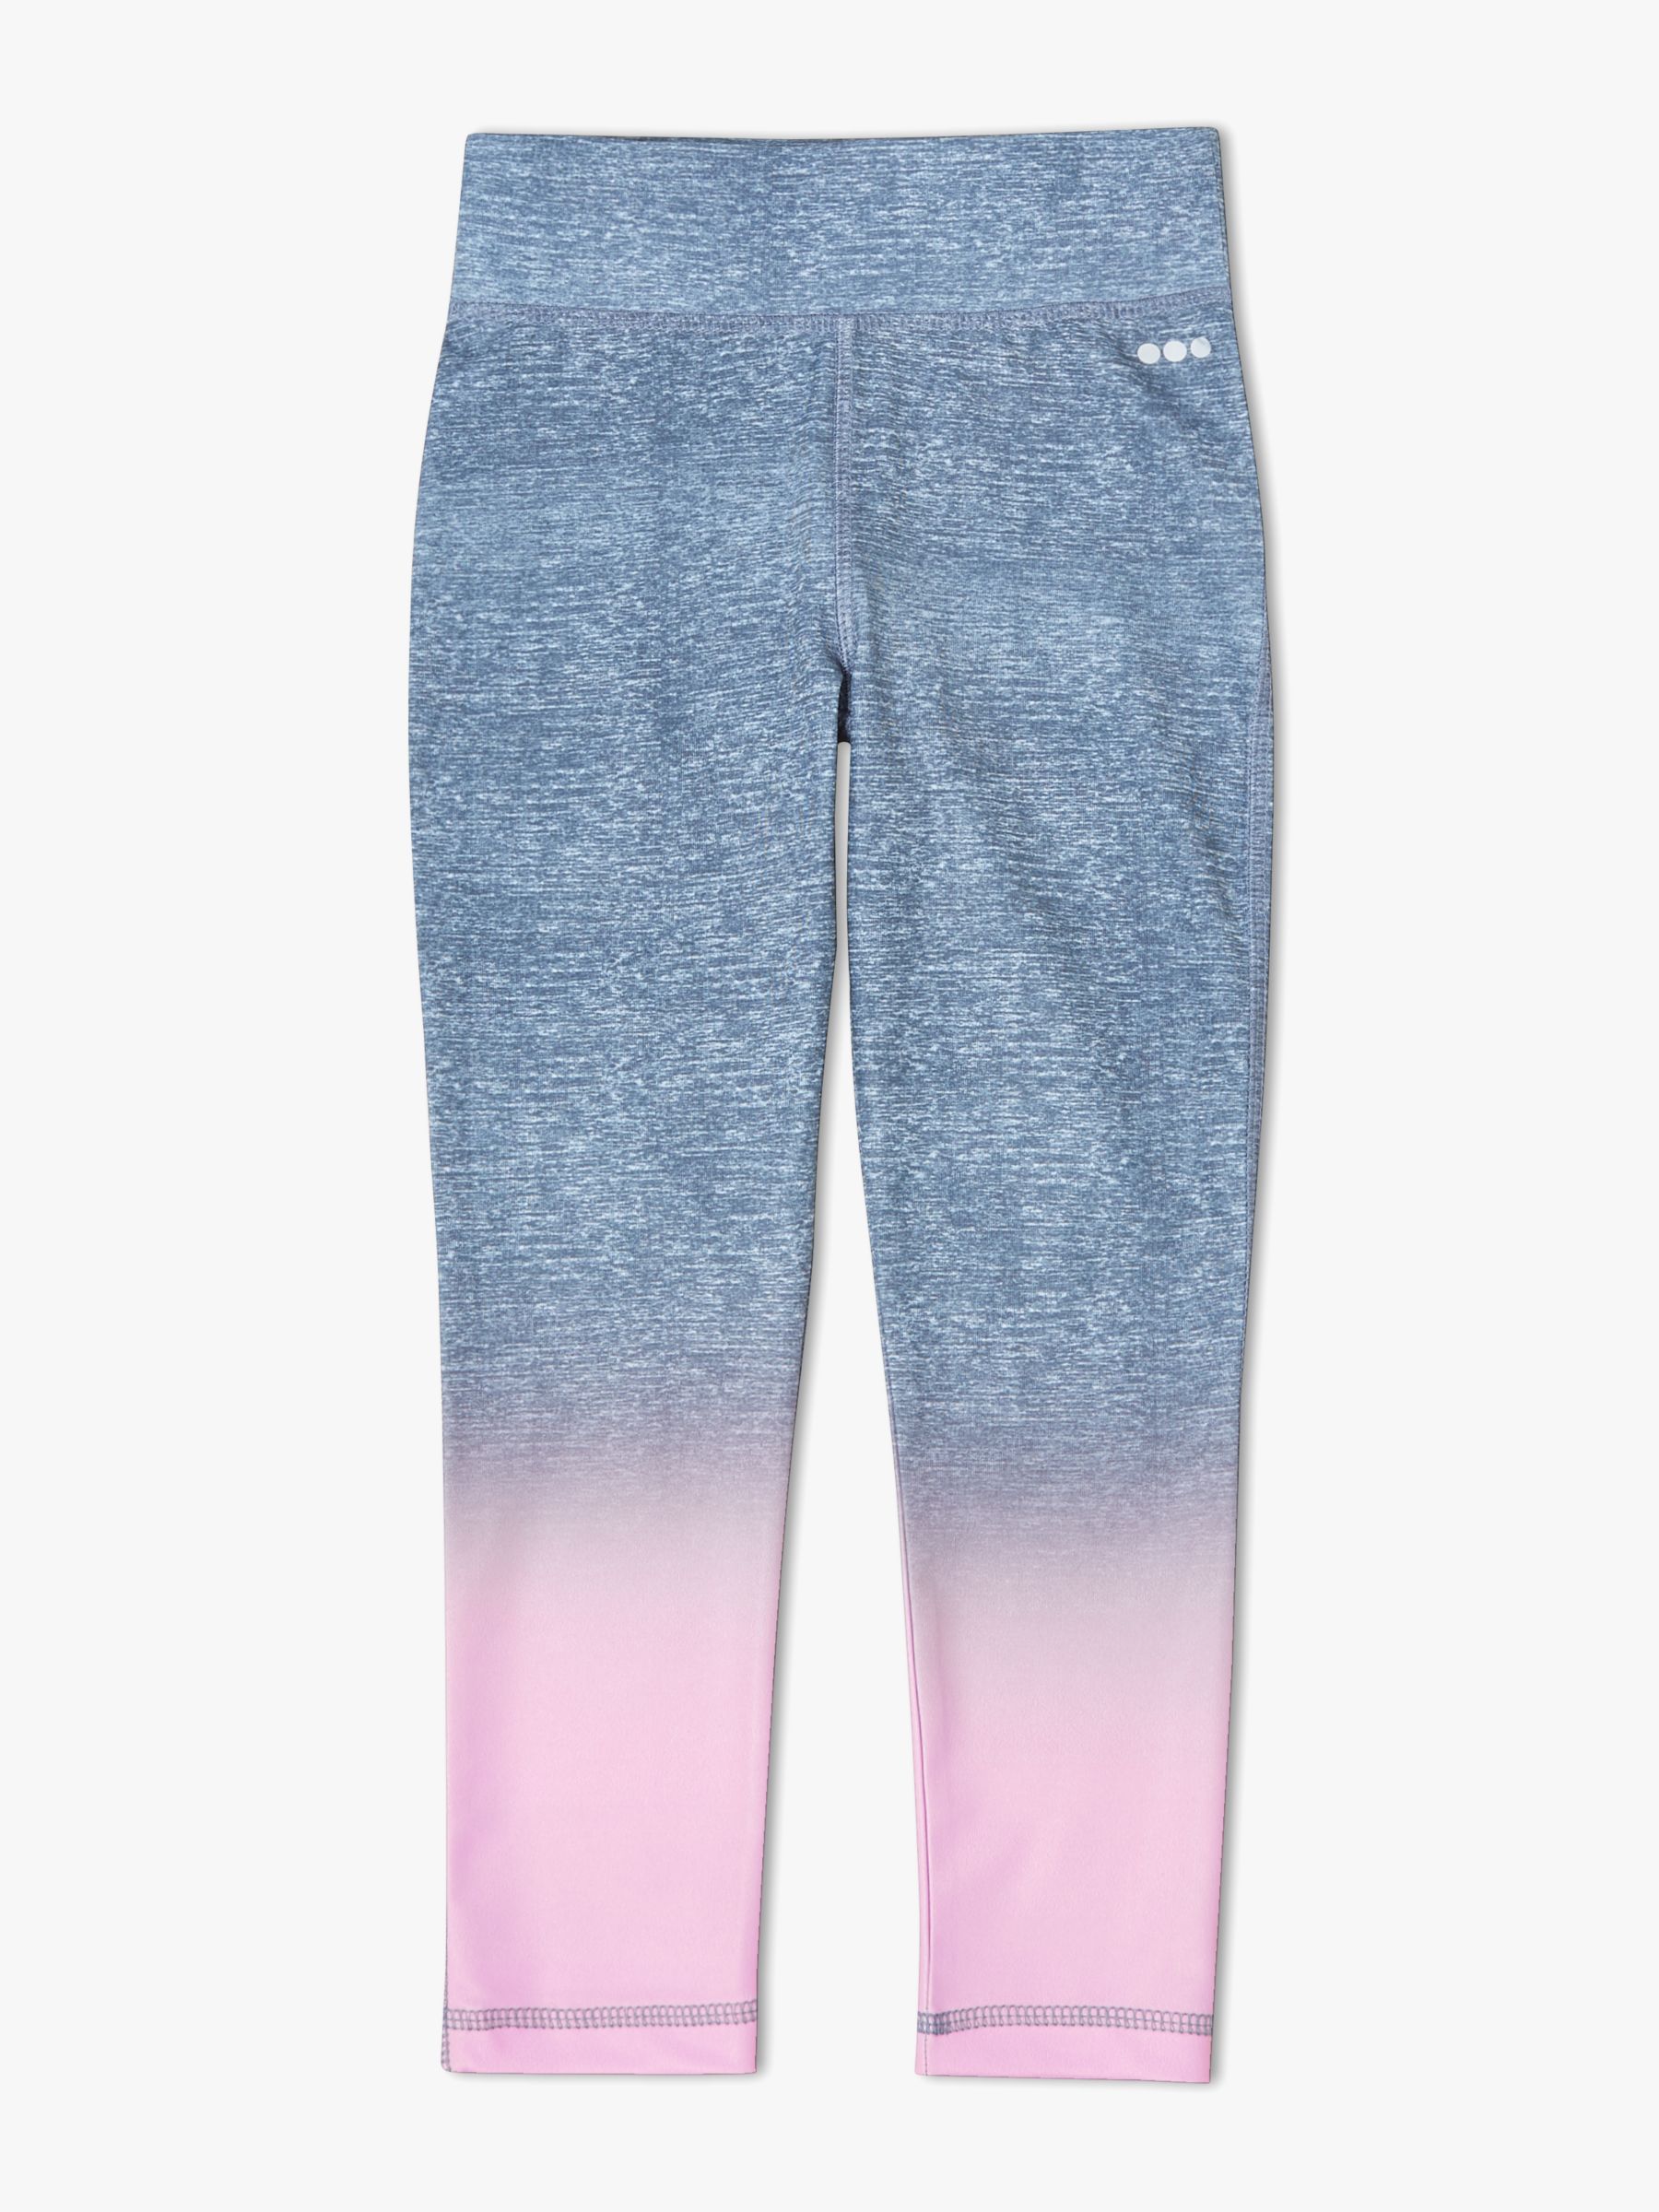 John Lewis & Partners Girls' Ombre Sports Leggings, Lilac, 5 years